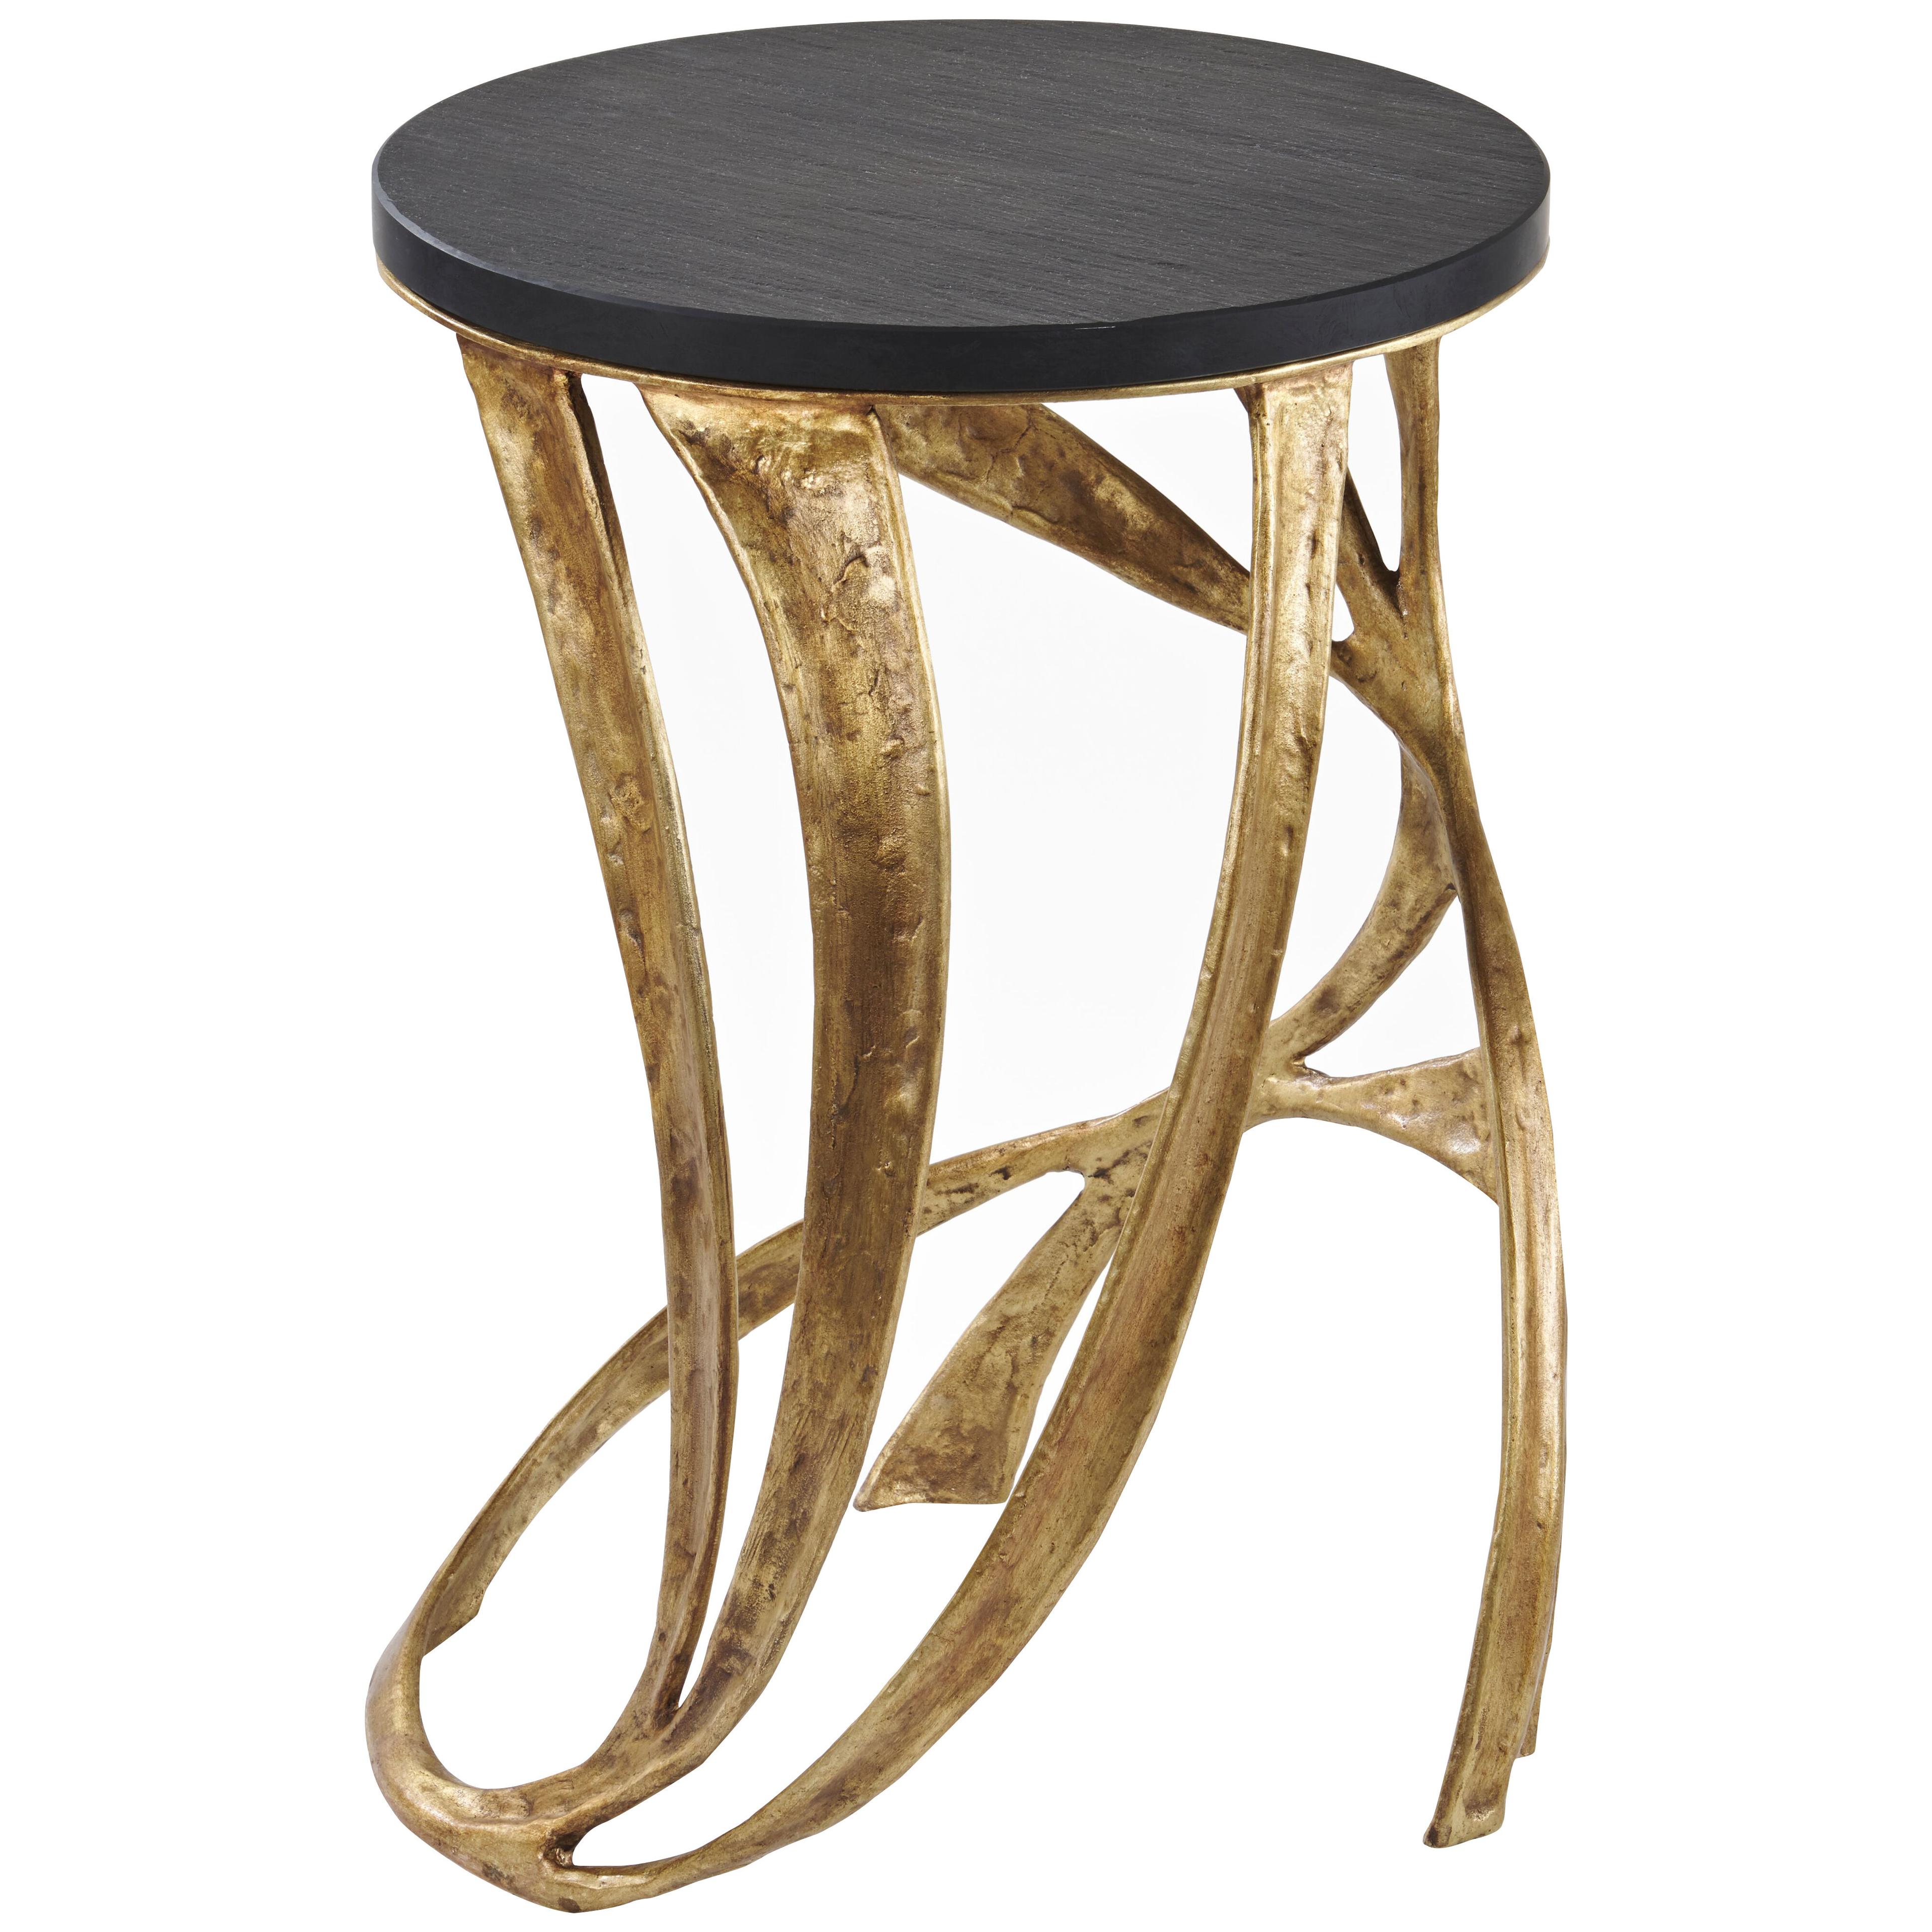 "Arcos" Bronze and Slate Pedestal Table by Franck Evennou, Limited Edition, 2021